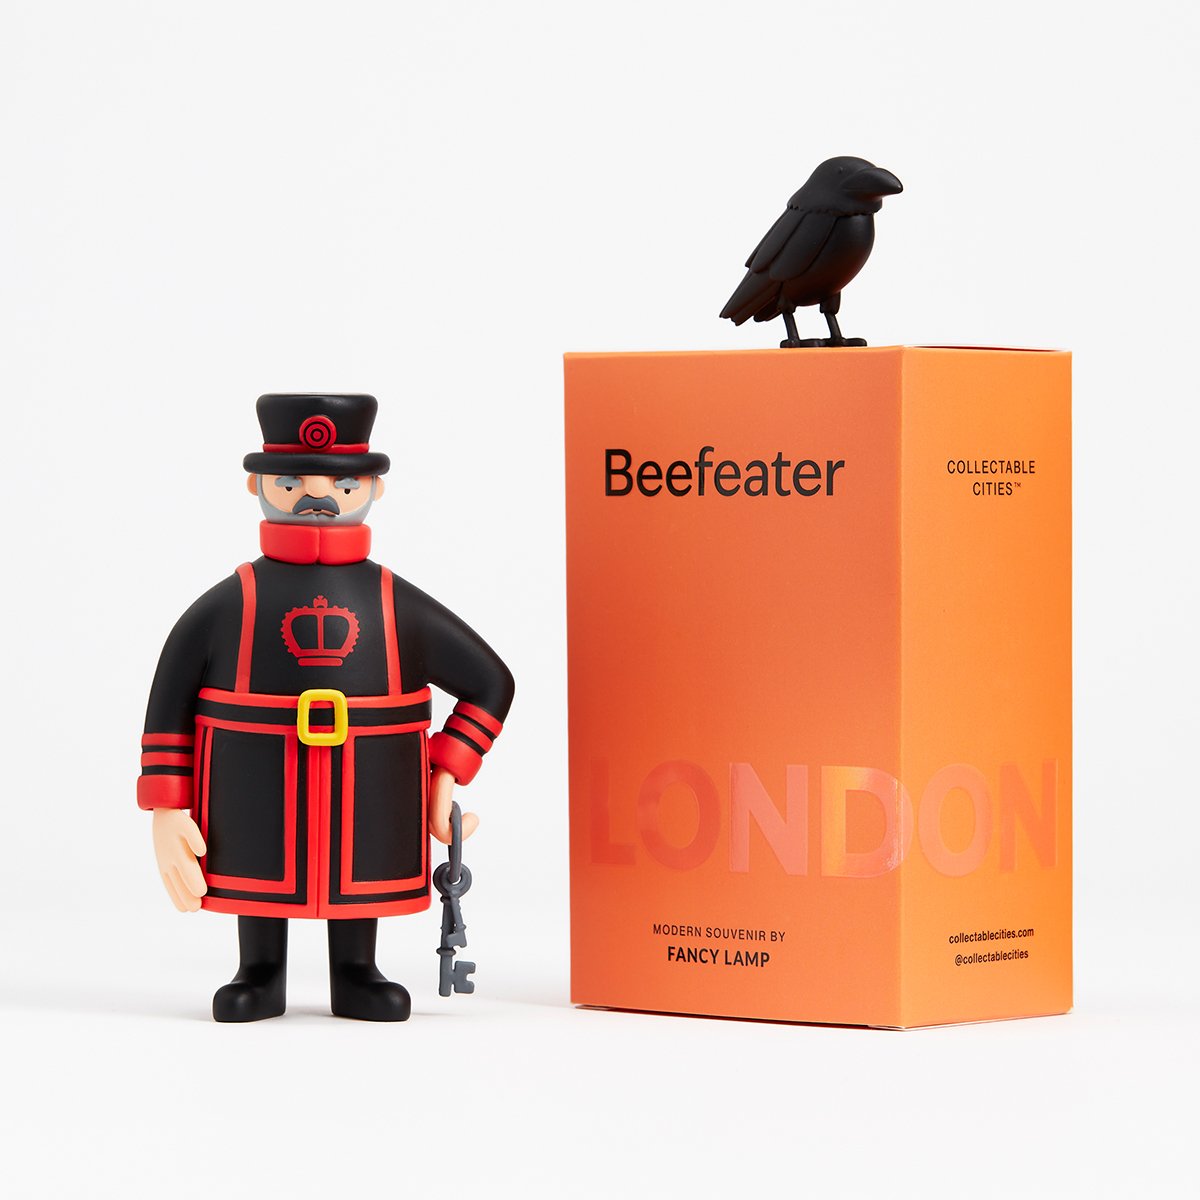 Collectable Cities Beefeater